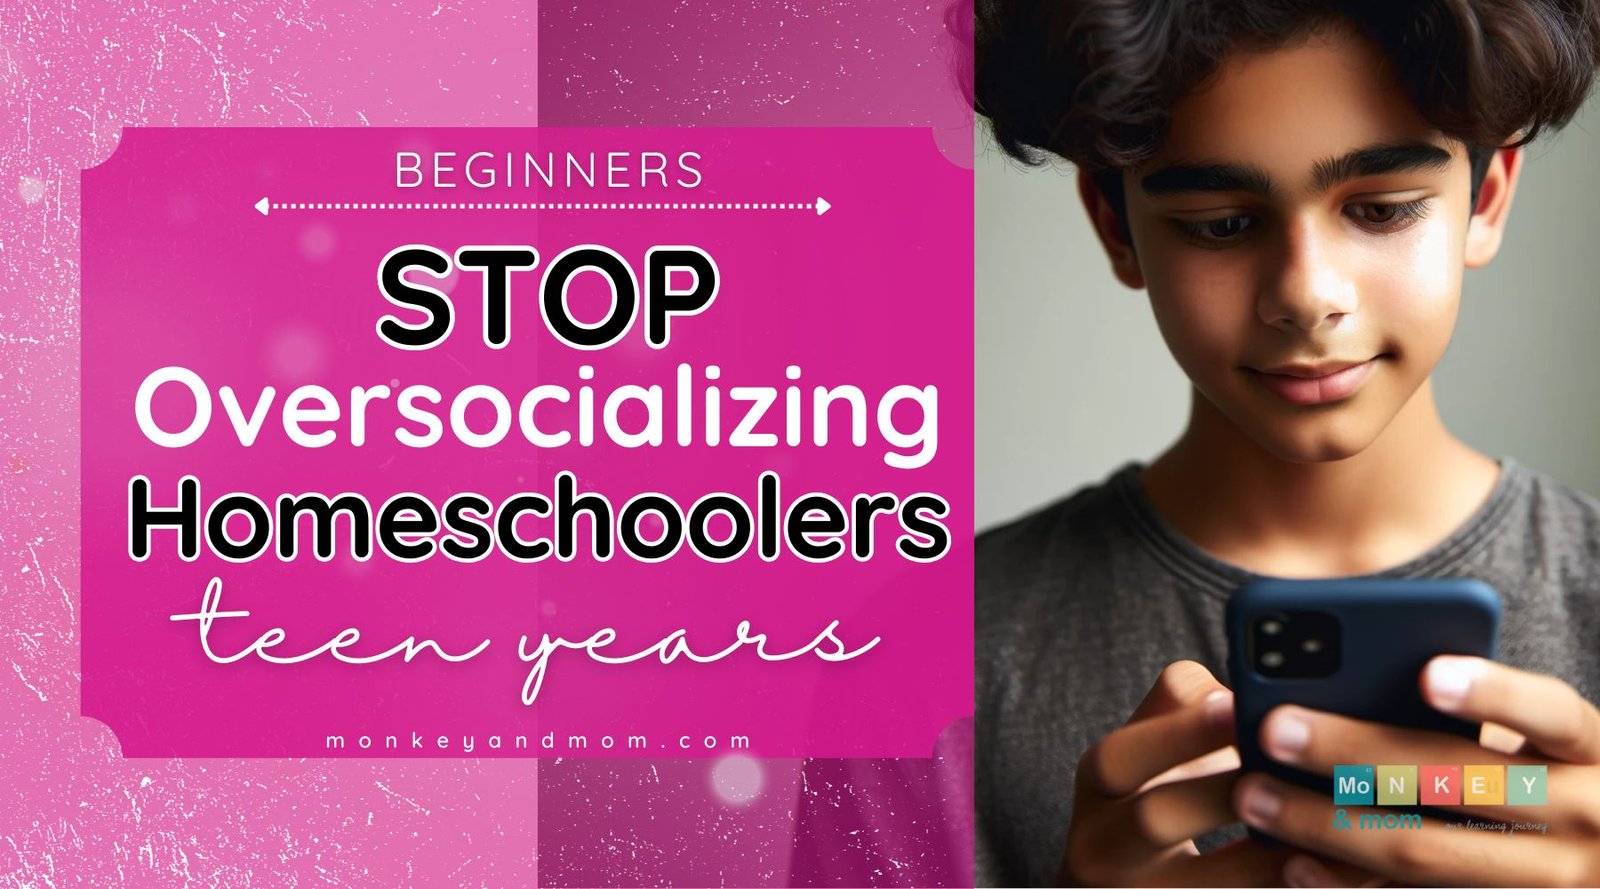 Stop Overemphasizing Socializing Homeschoolers | The Teen Edition